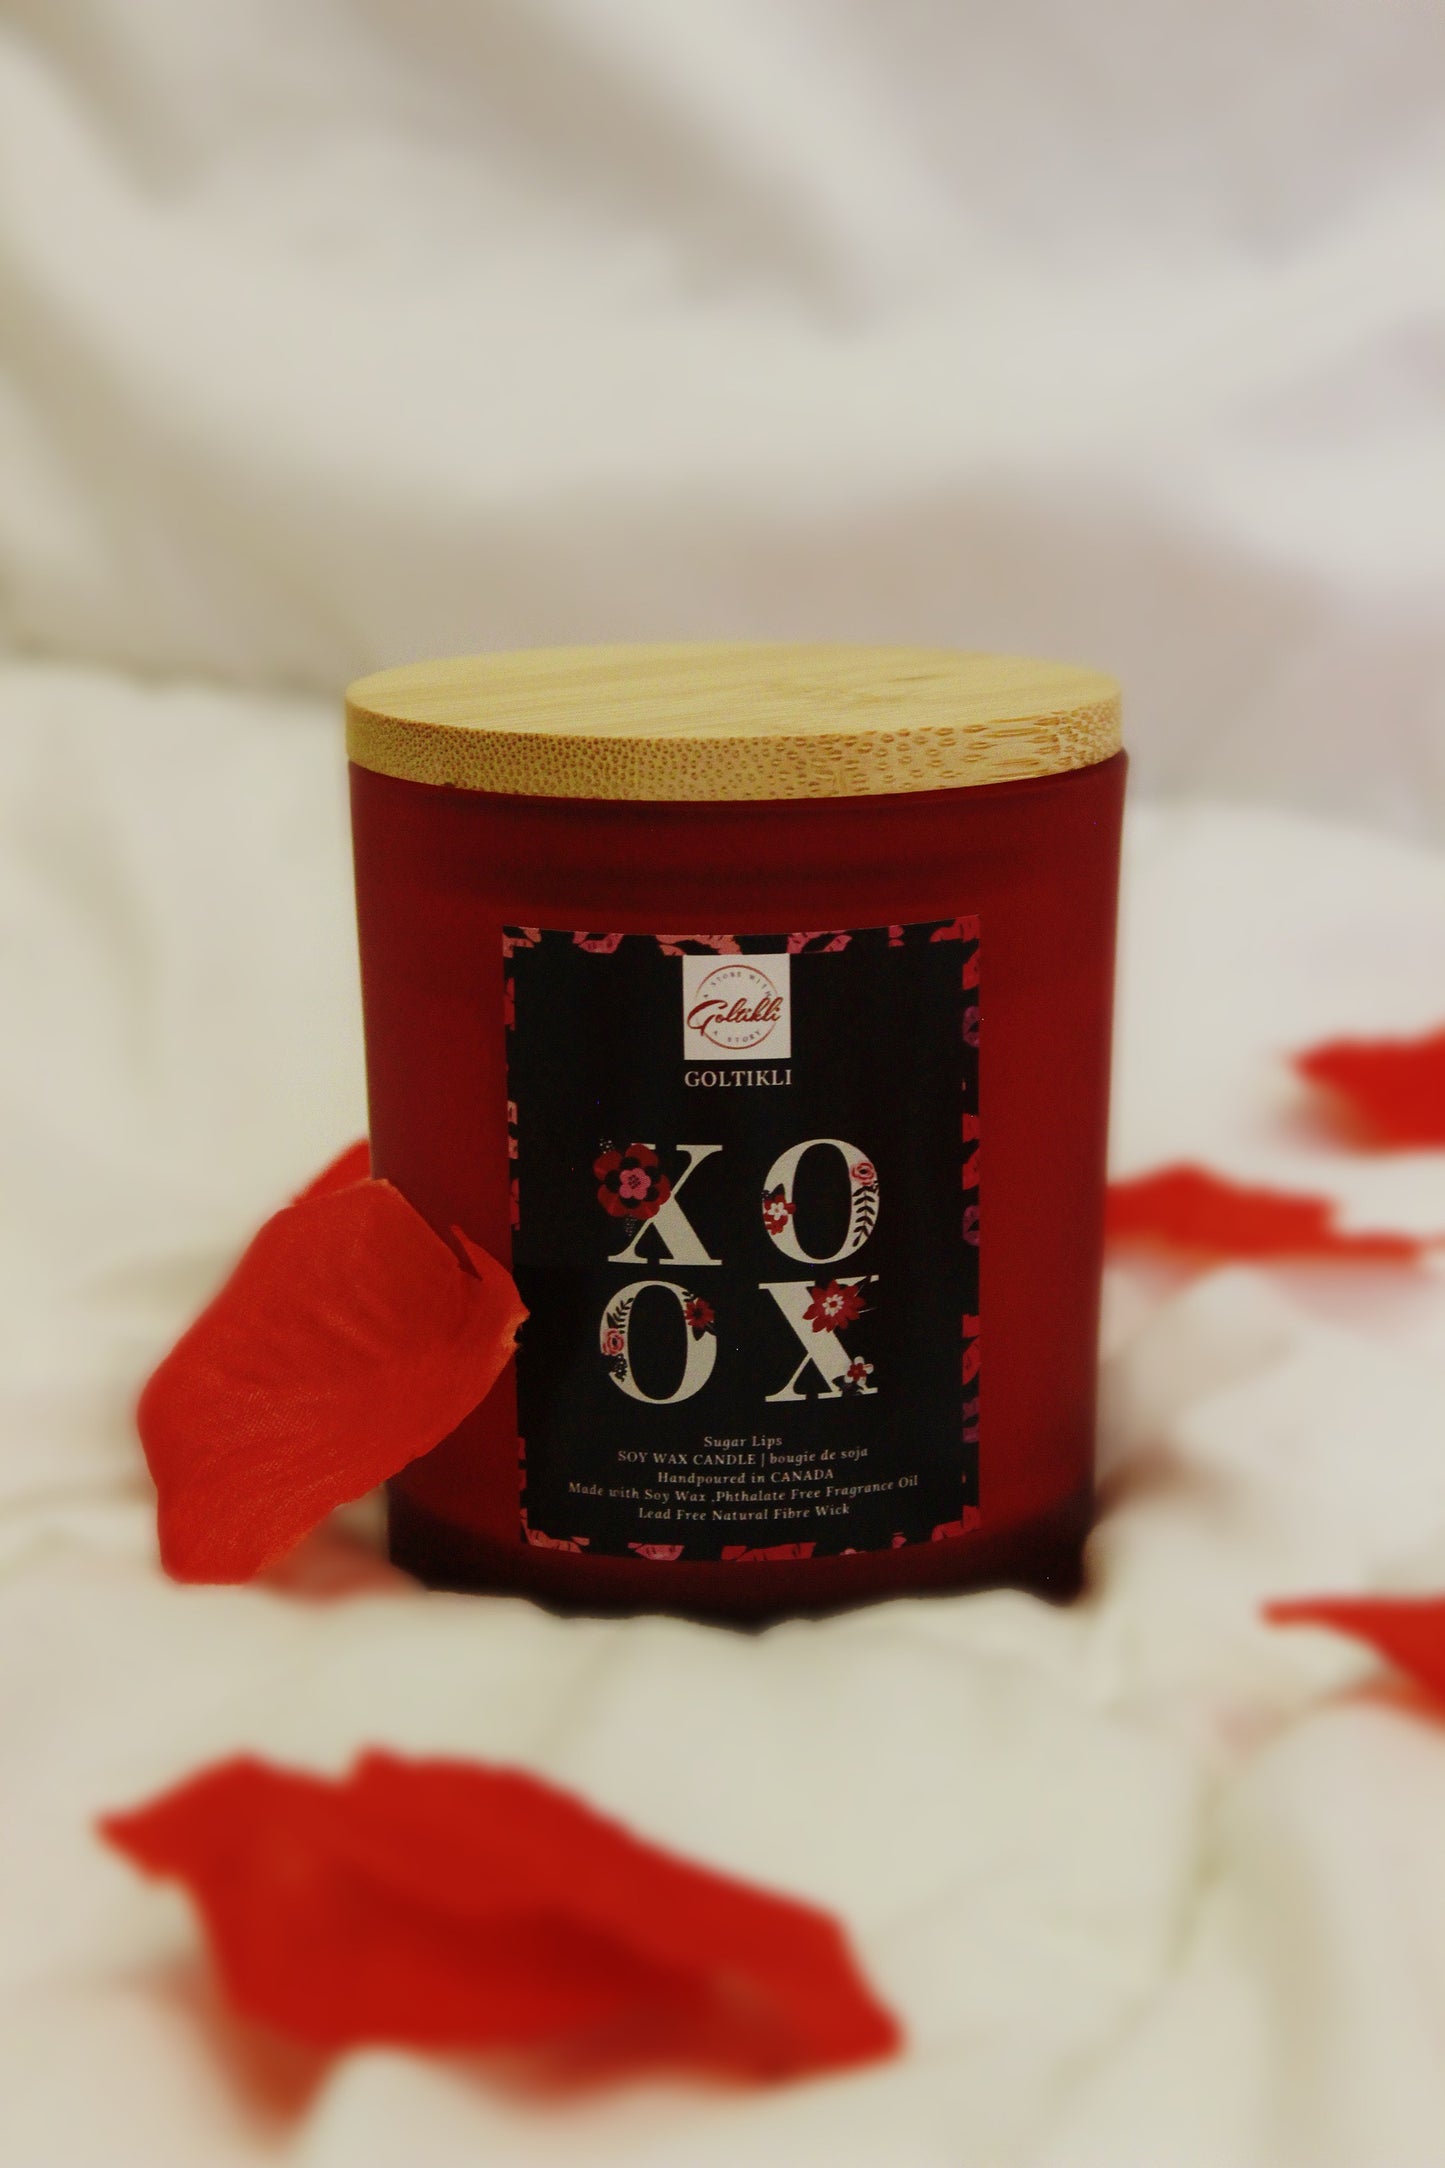 XOXO - Sugar Lips Scented Soy Wax Candle